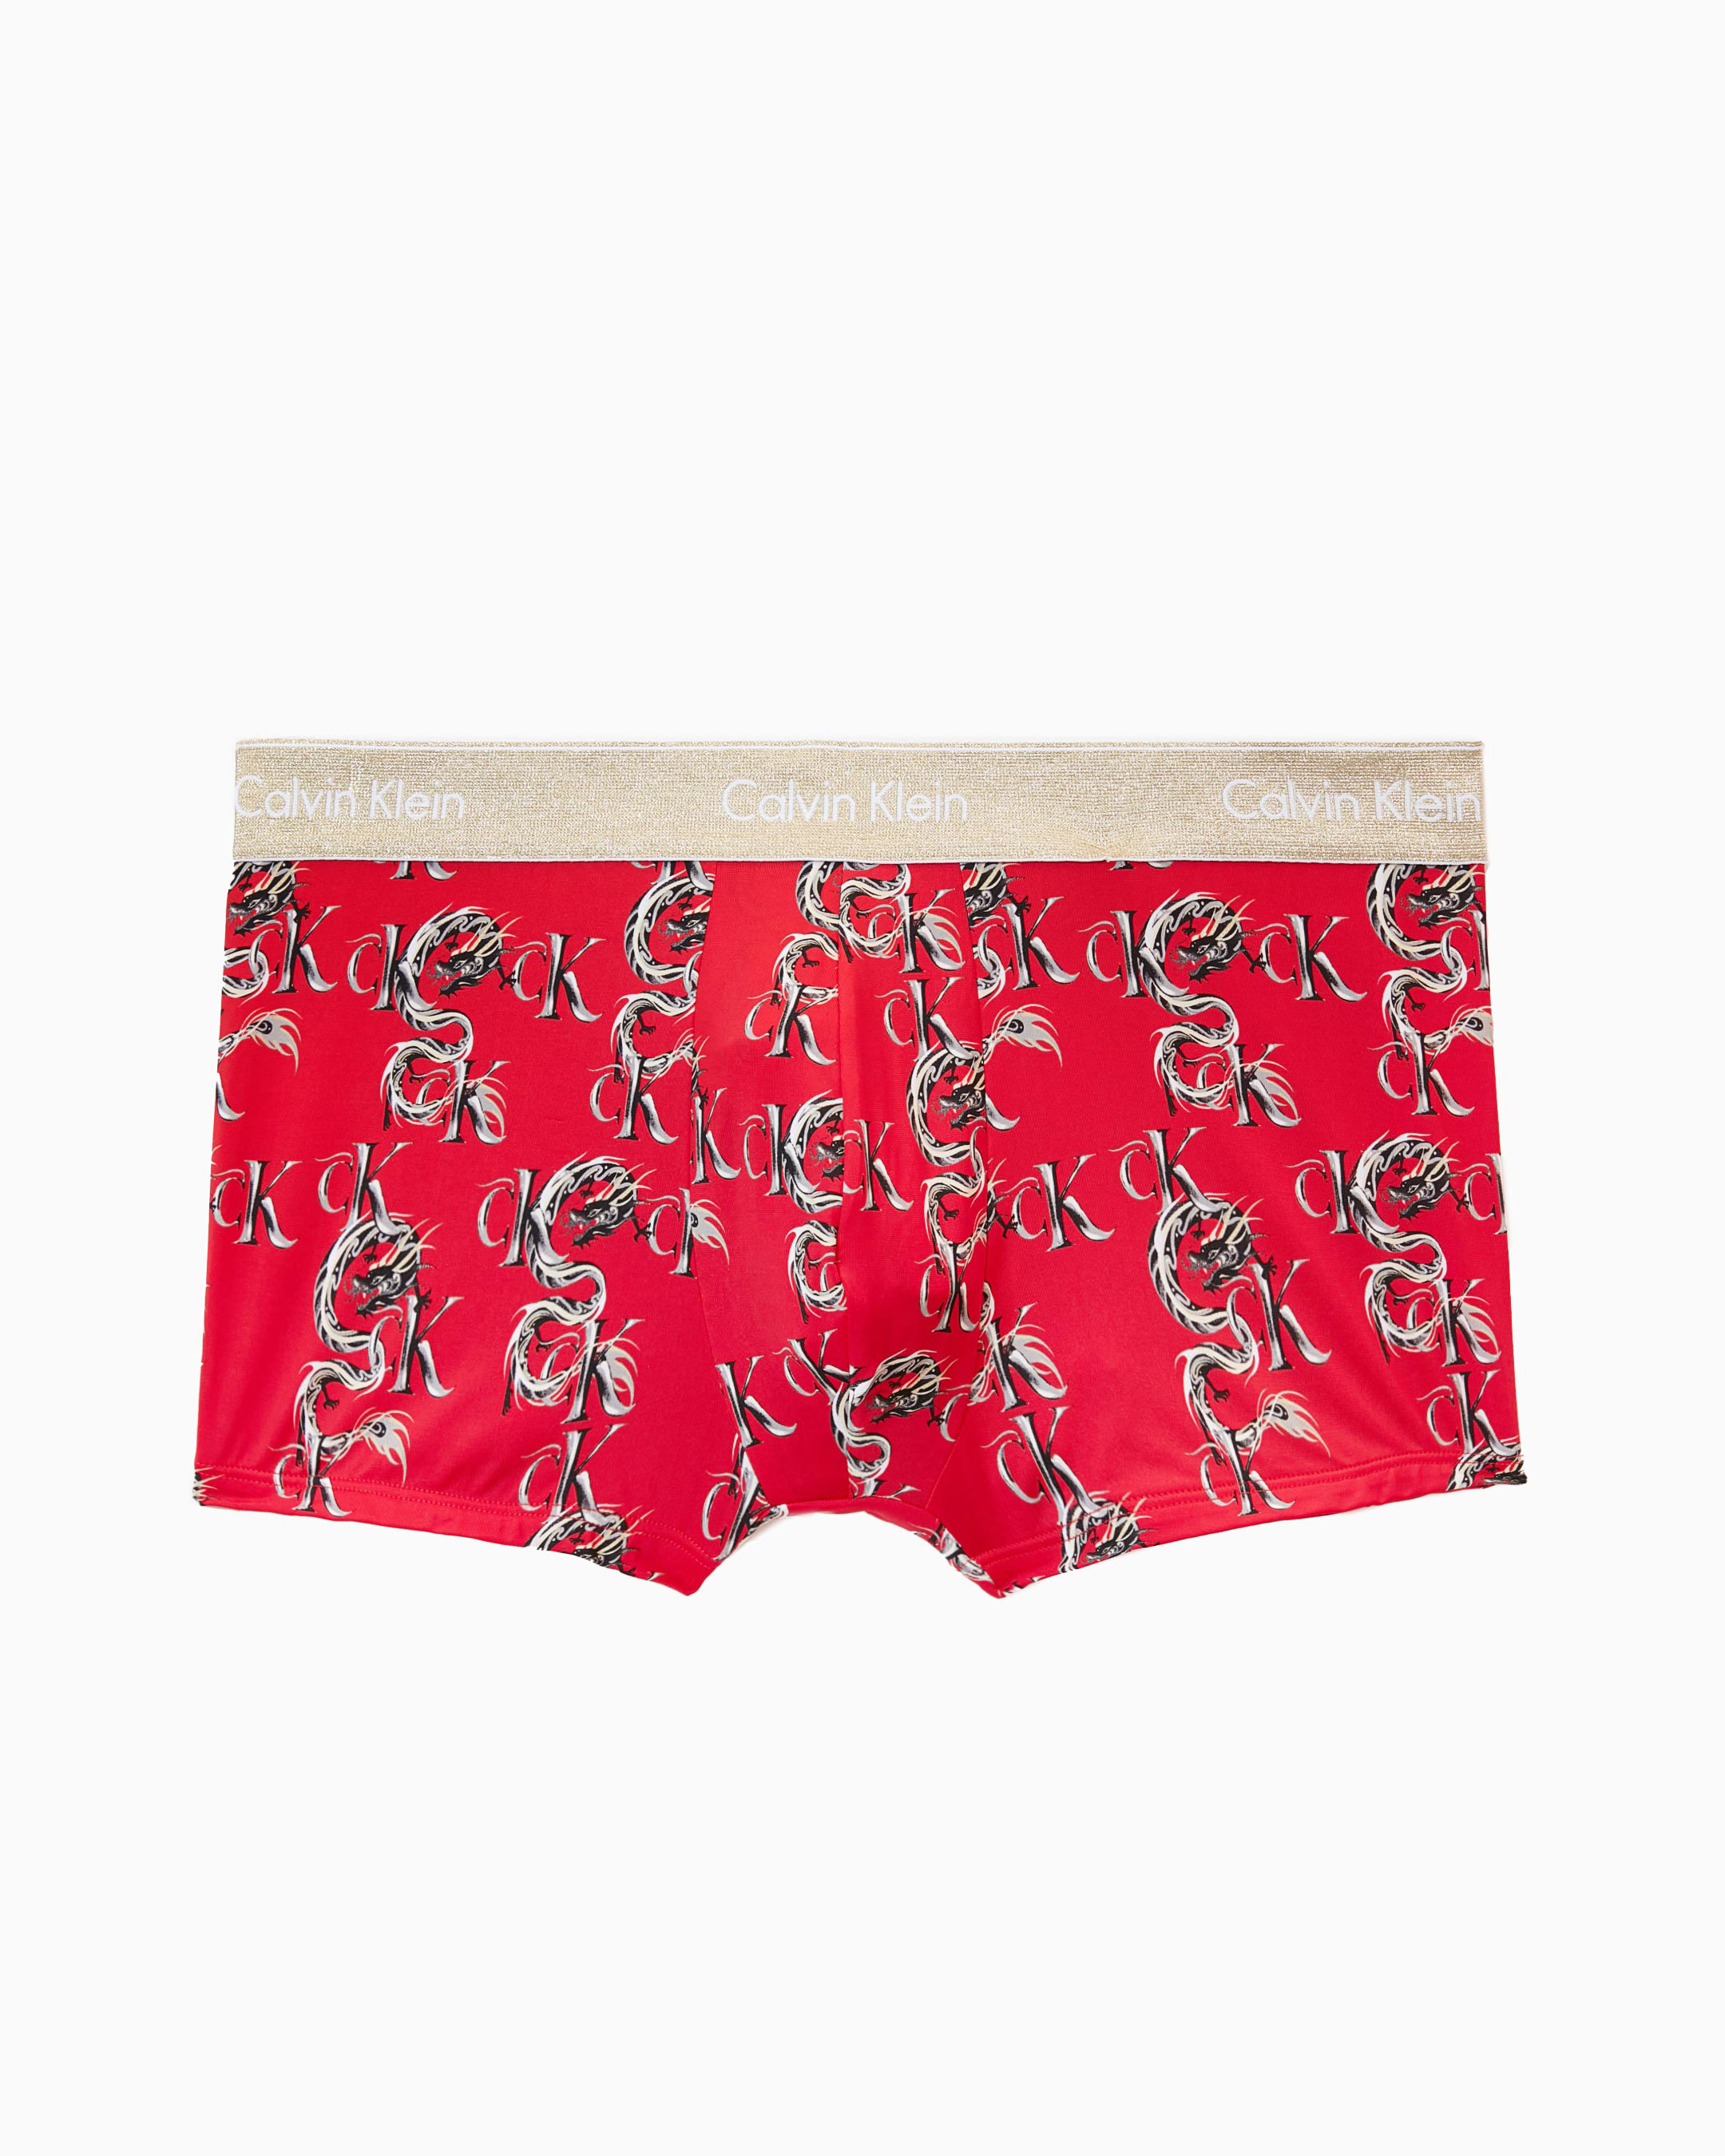 Year of the Dragon Monogram Trunks, red